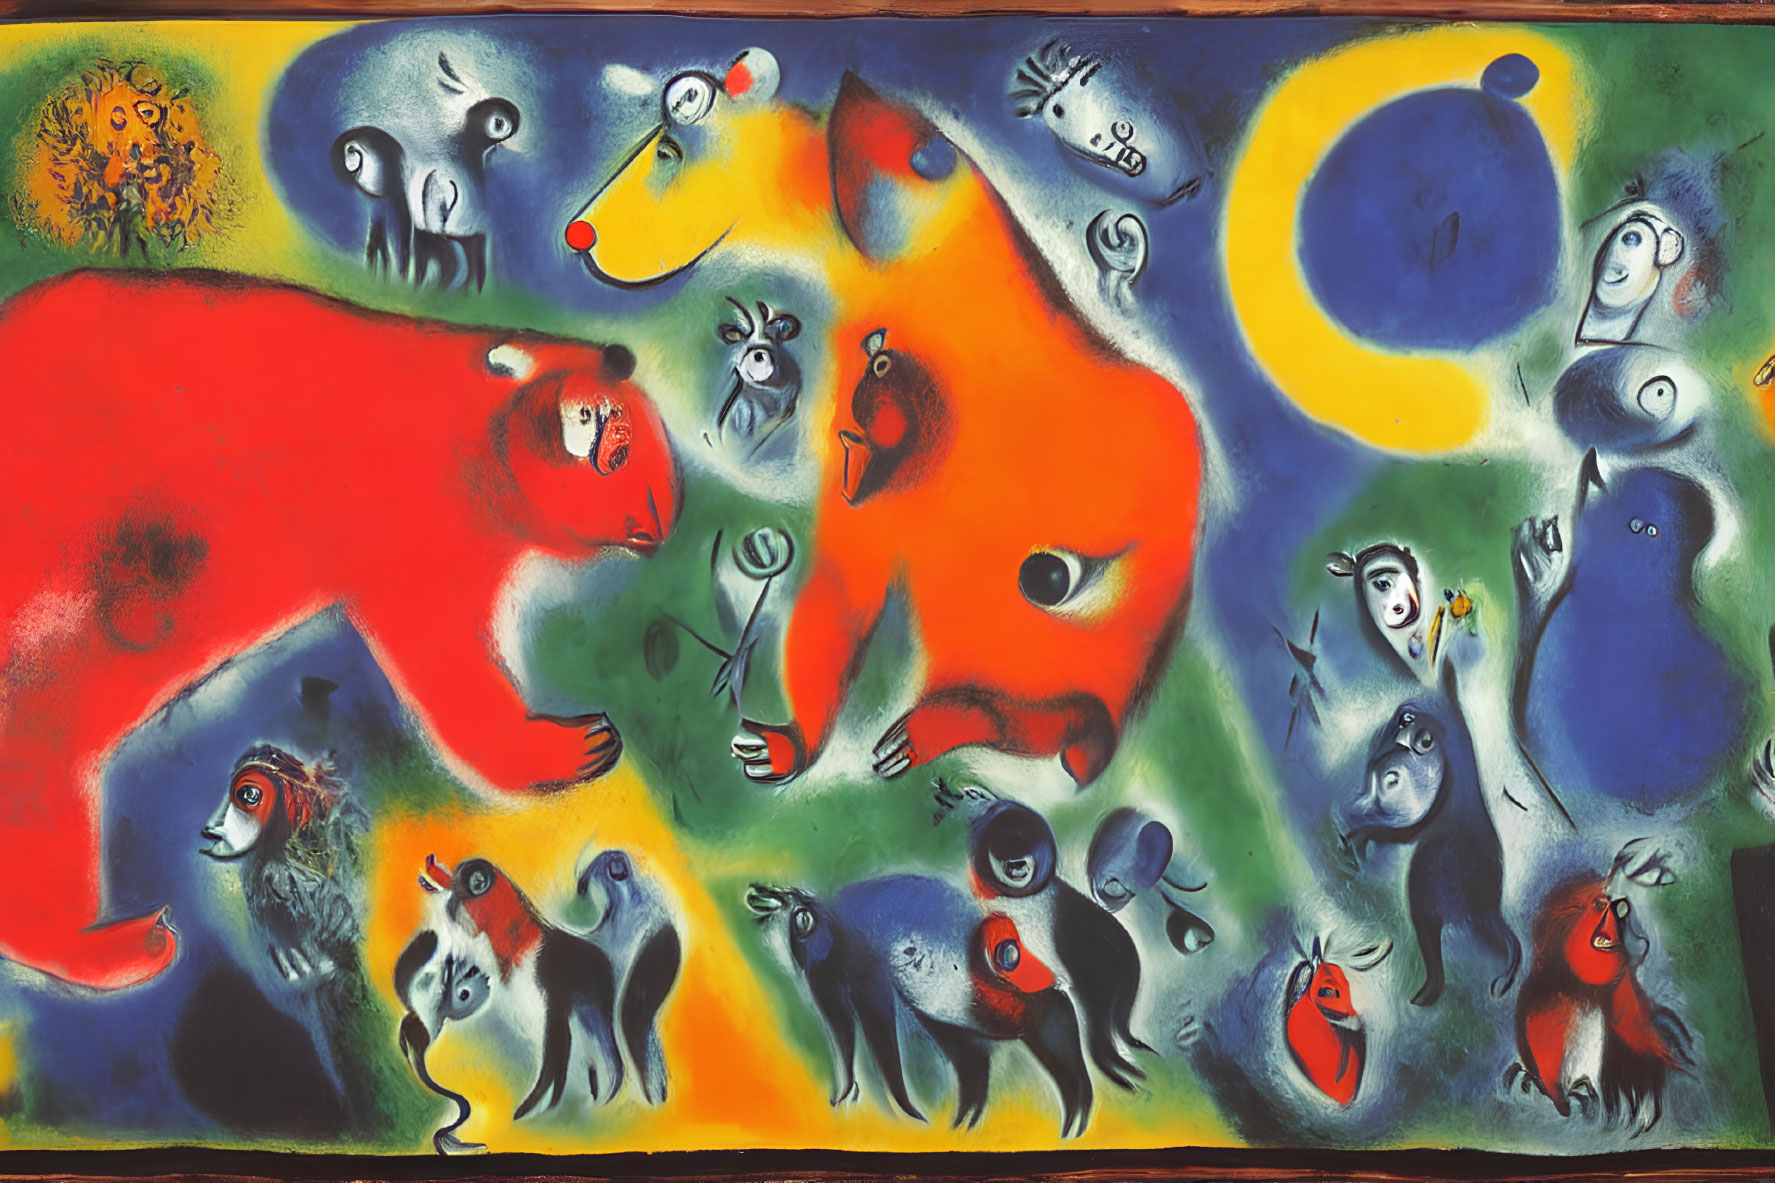 Colorful Abstract Painting with Celestial Bodies and Animal-like Figures